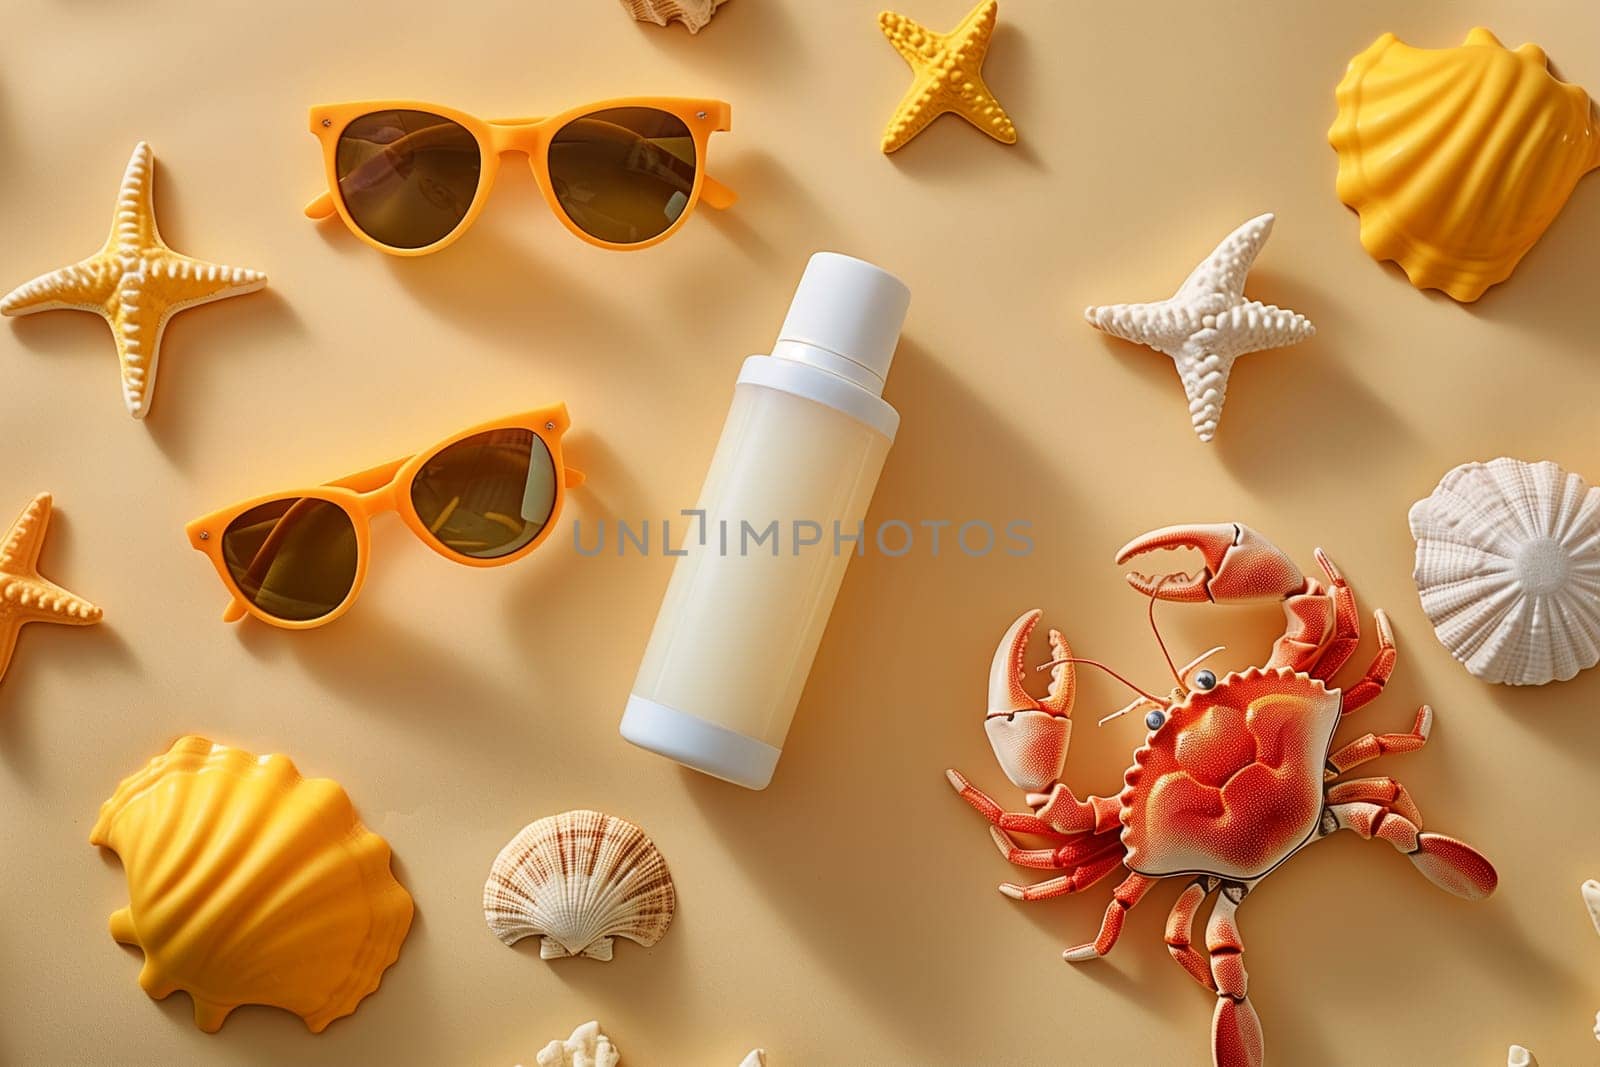 A flat lay photo of summer beach items, including sunglasses, seashells, and a bottle of sunscreen. There is also a red crab in the middle of the image.